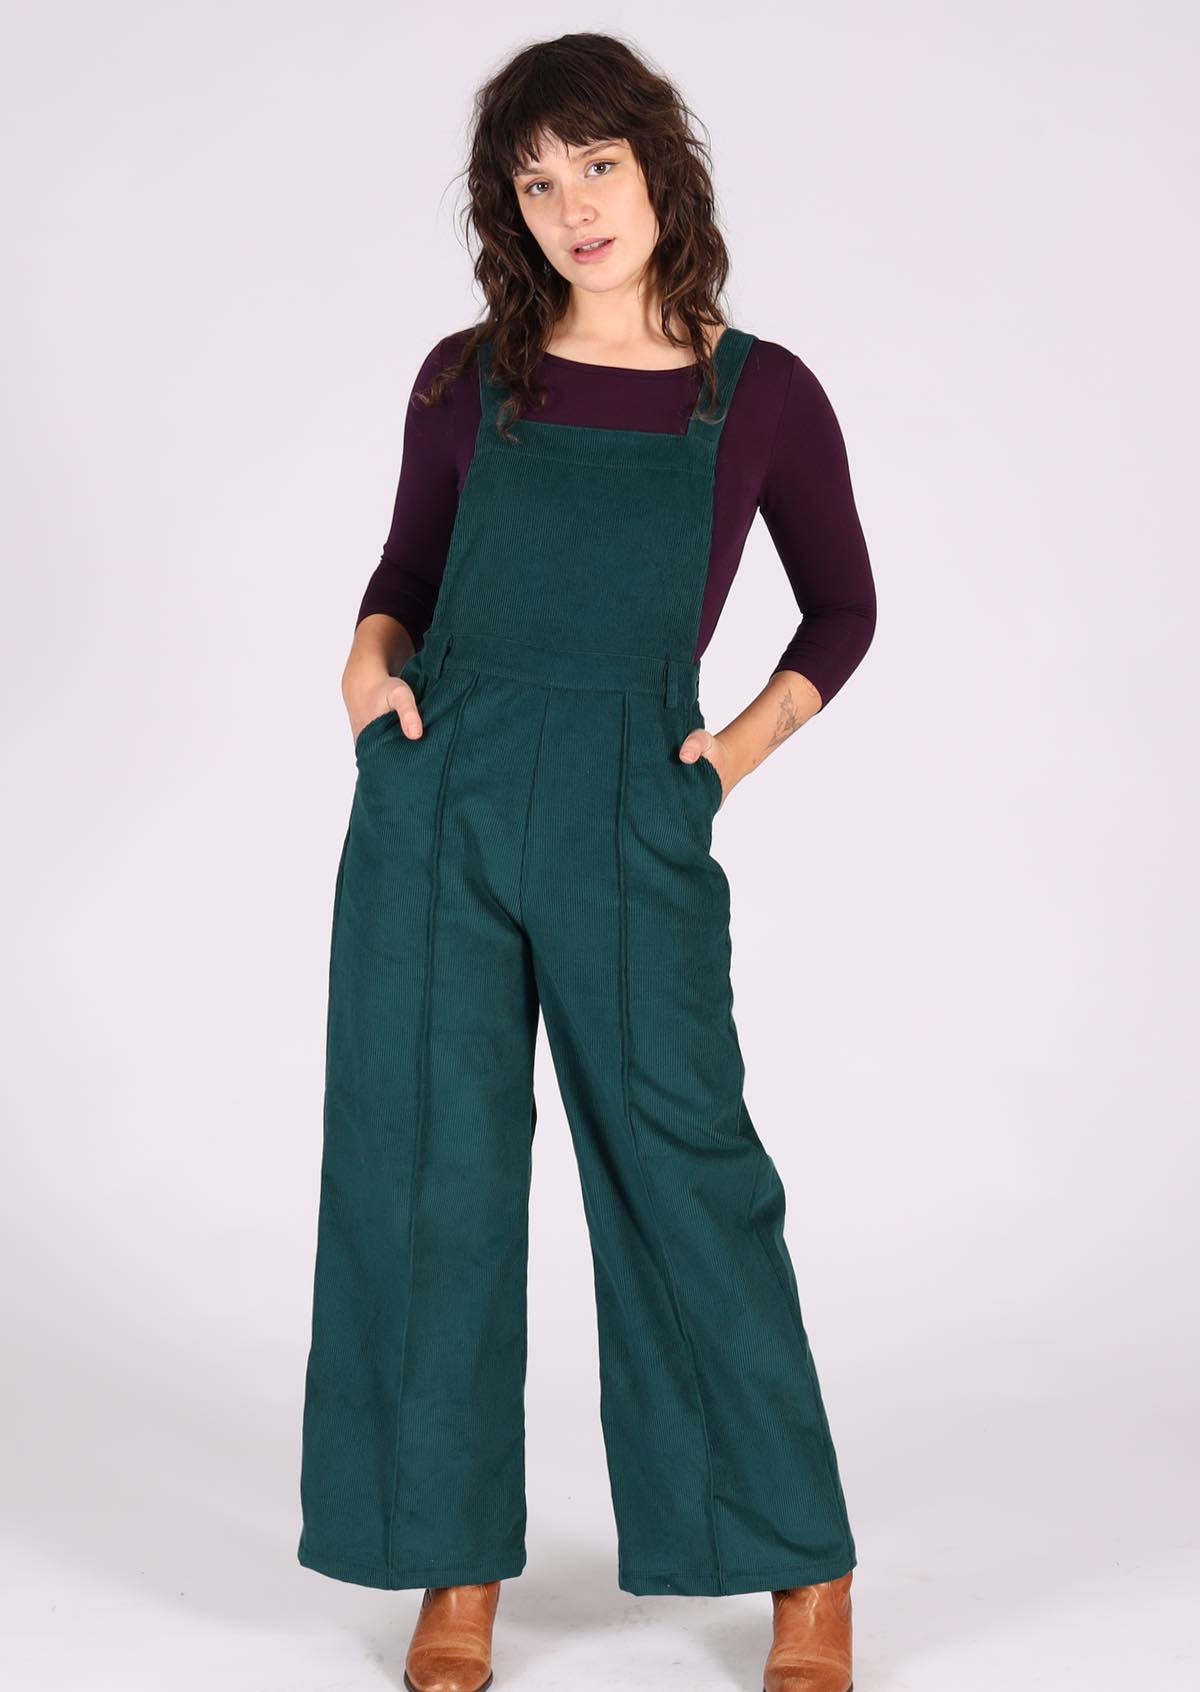 woman wearing dark teal cotton corduroy overalls over long sleeve purple top with hands in pockets